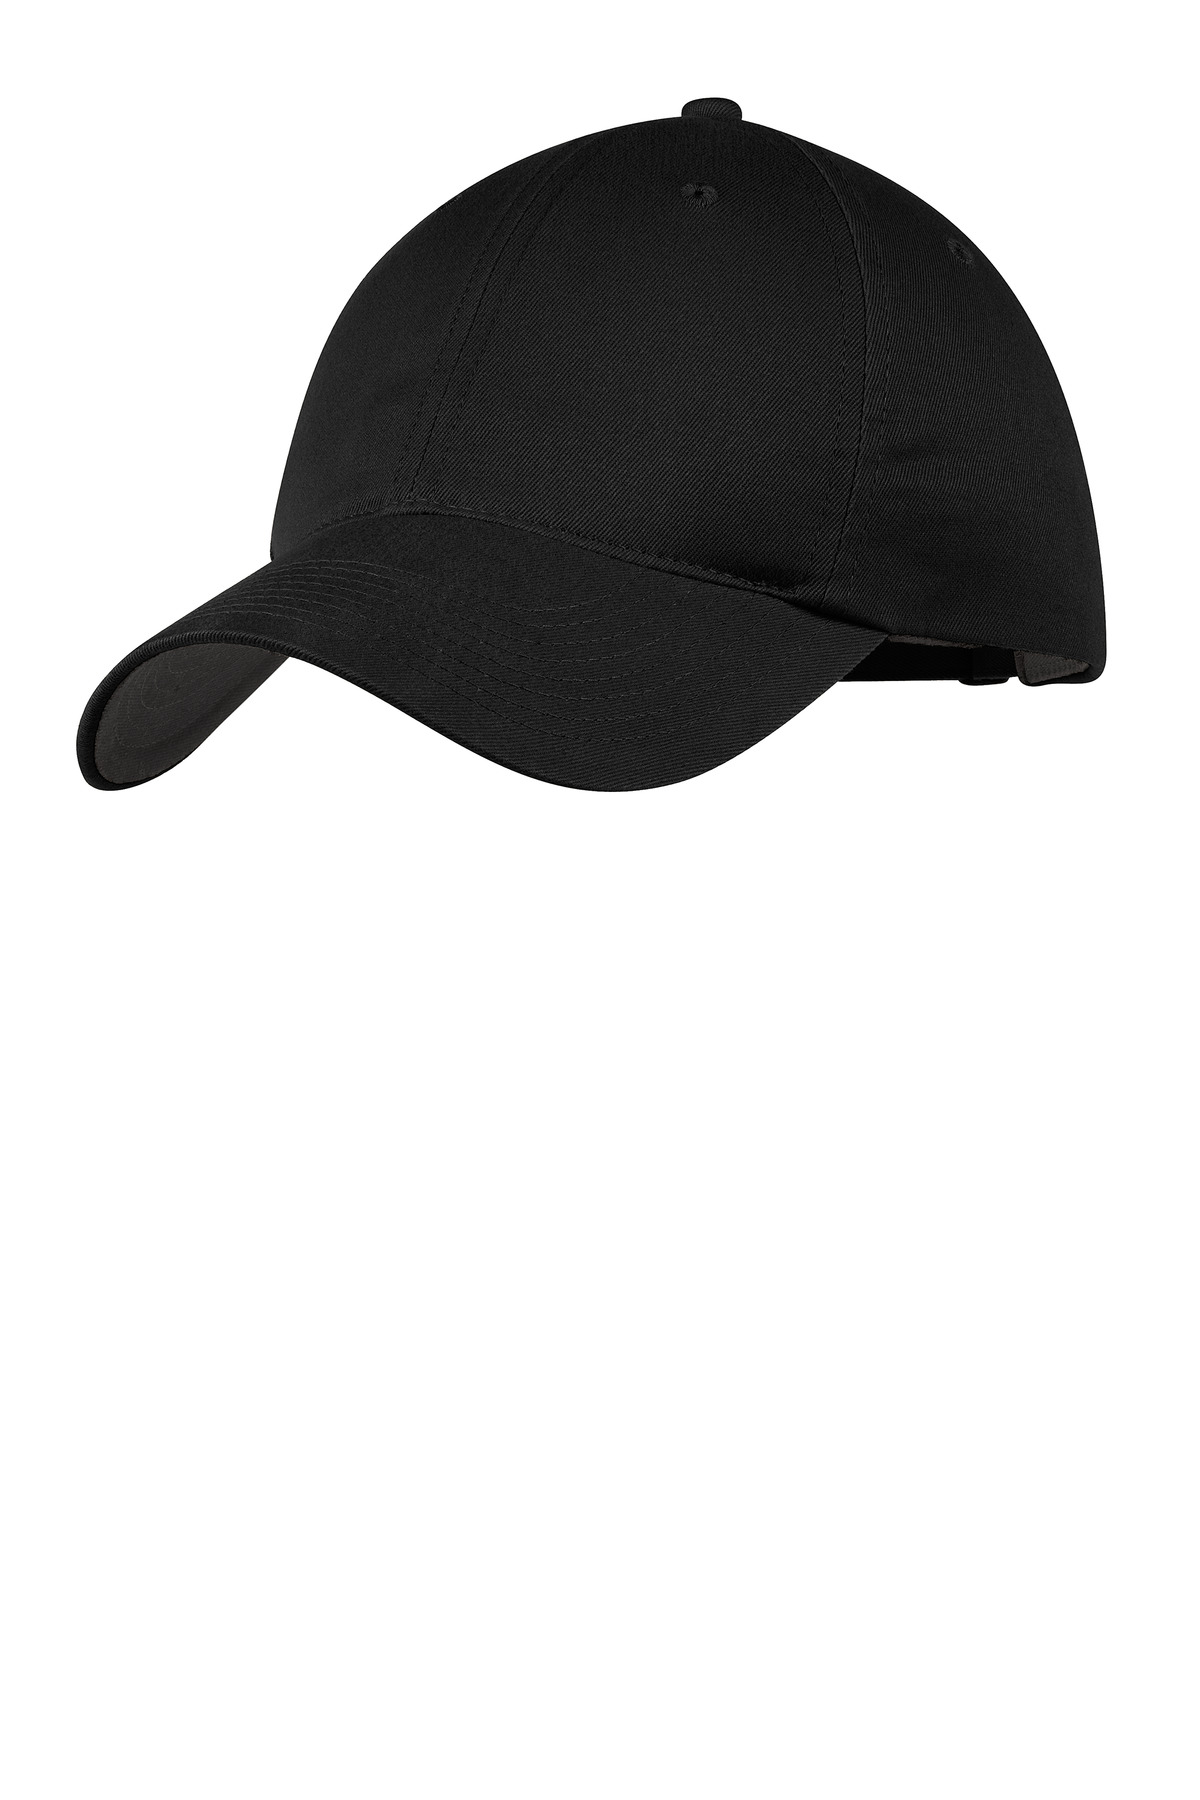 Nike Unstructured Cotton/Poly Twill Cap-Nike